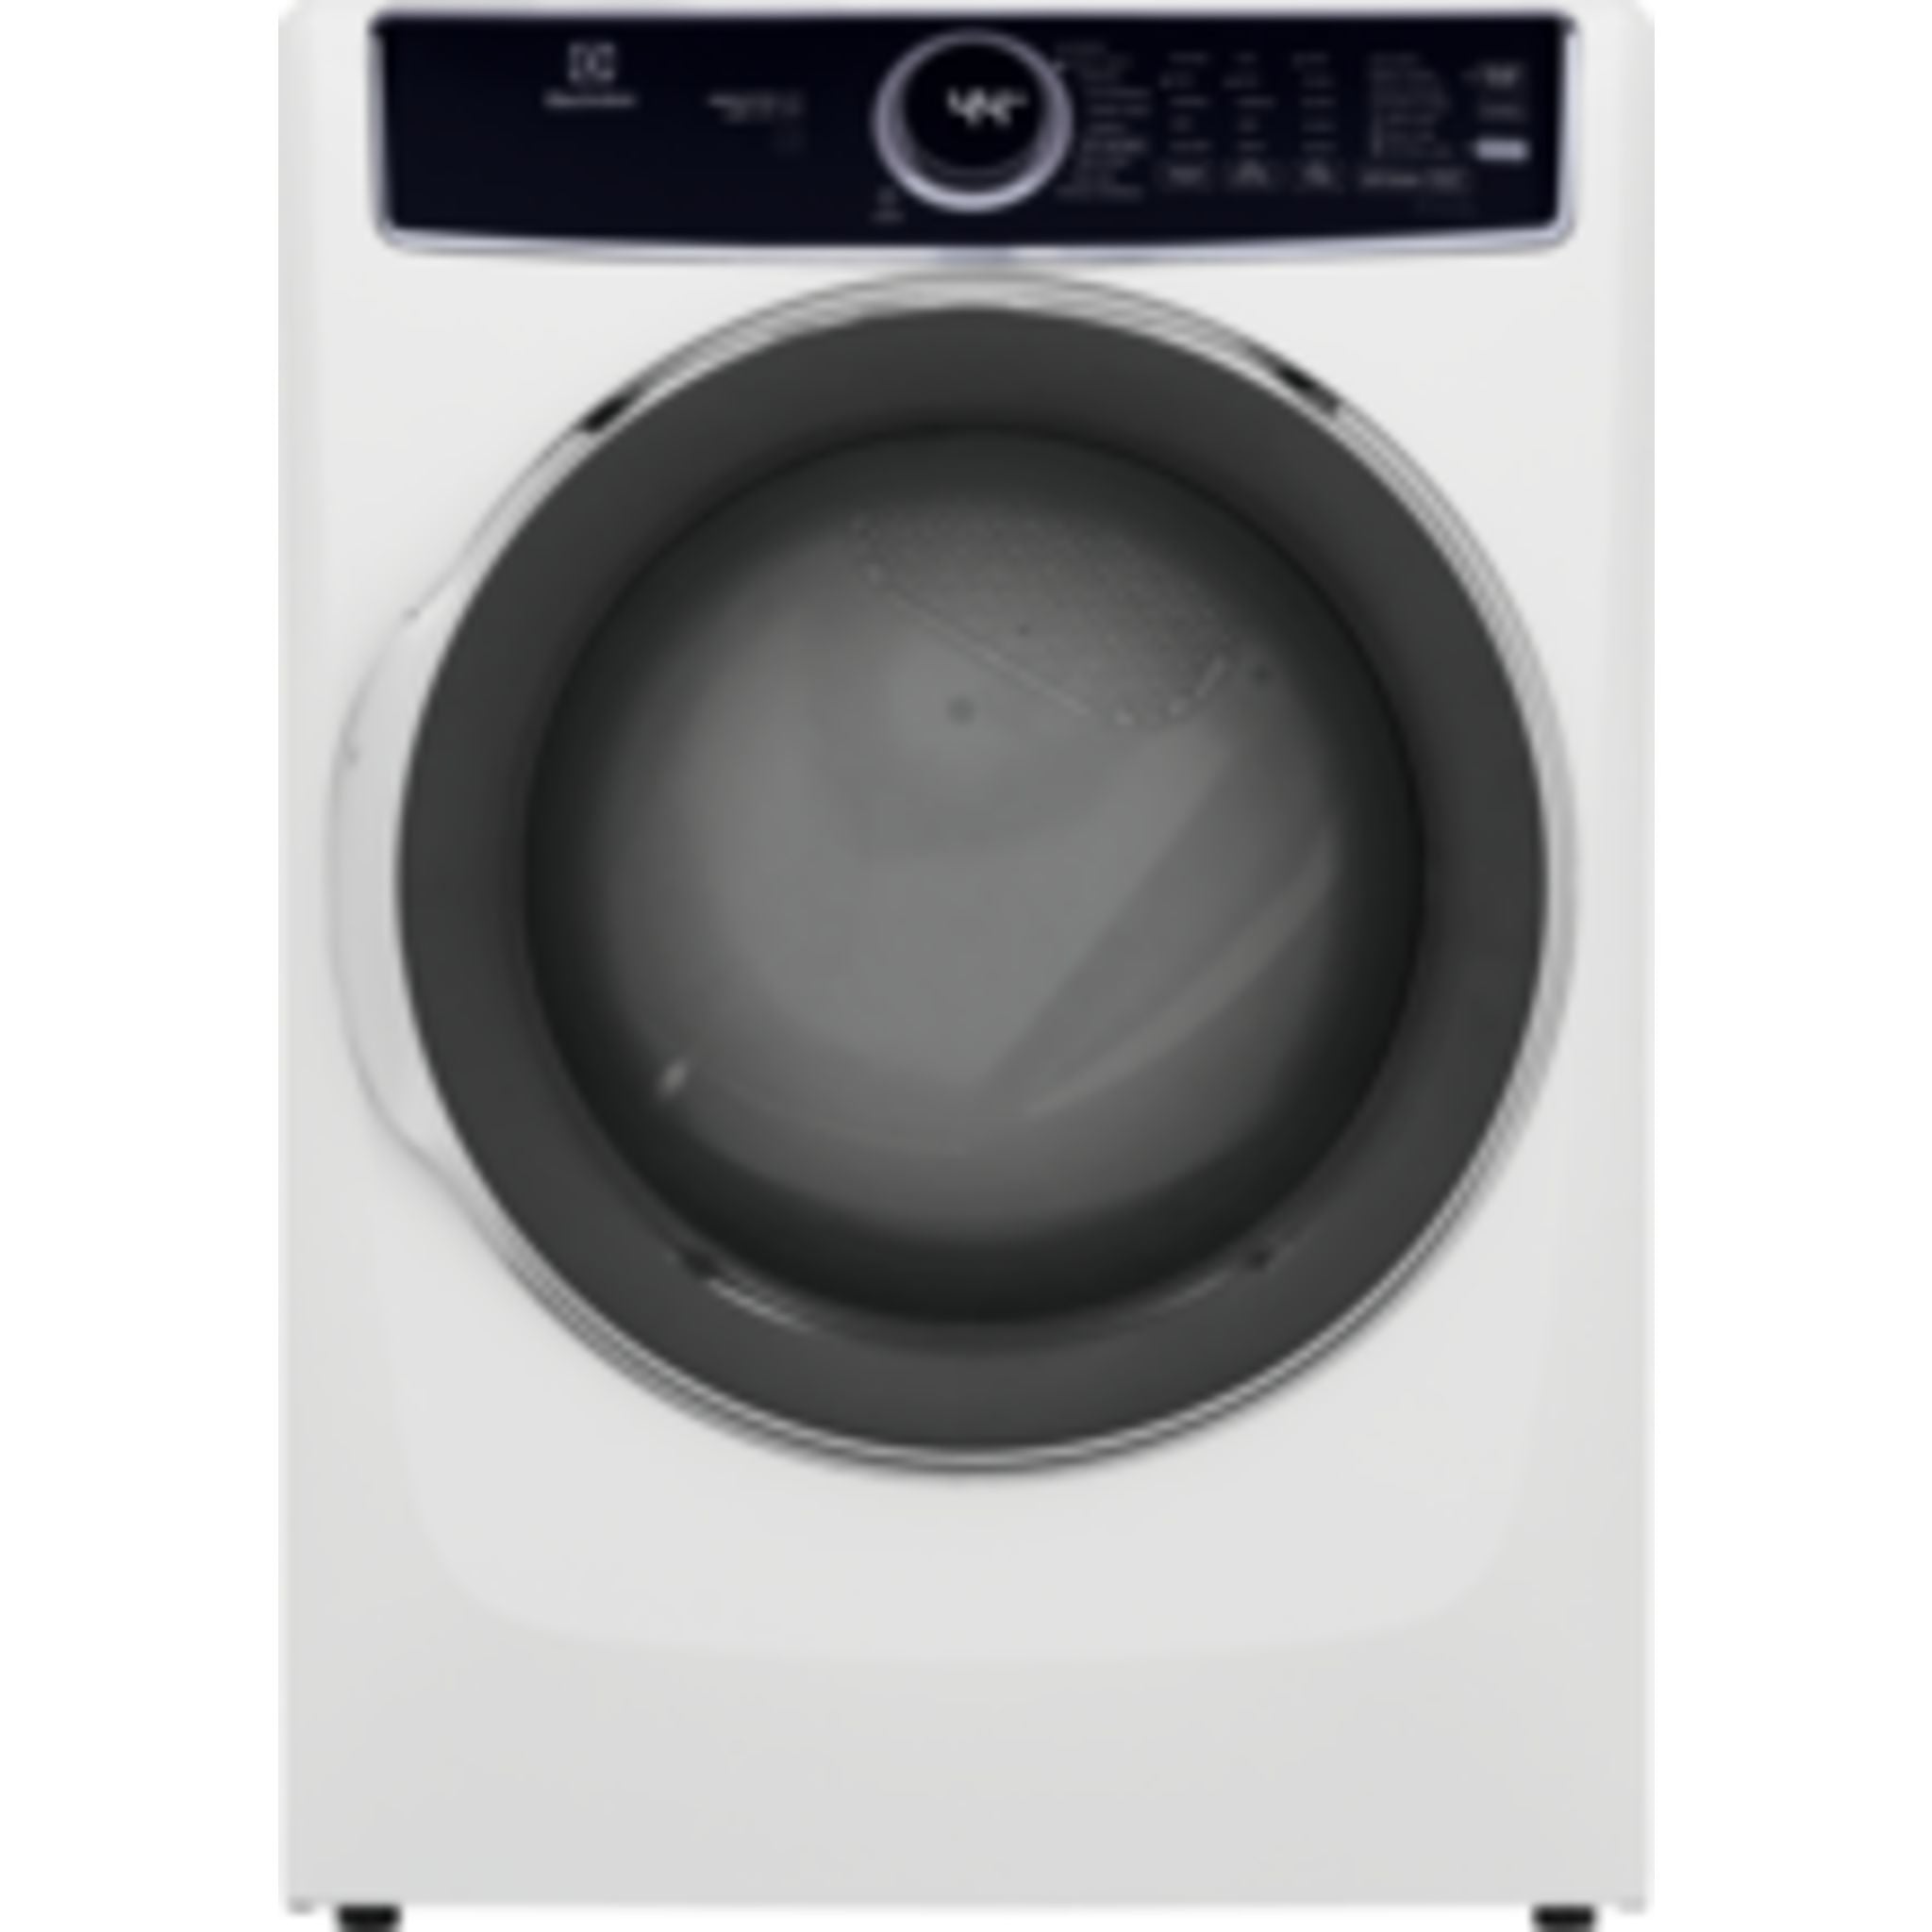 Electrolux Home Products, Electrolux Gas Dryer (ELFG7537AW) - White